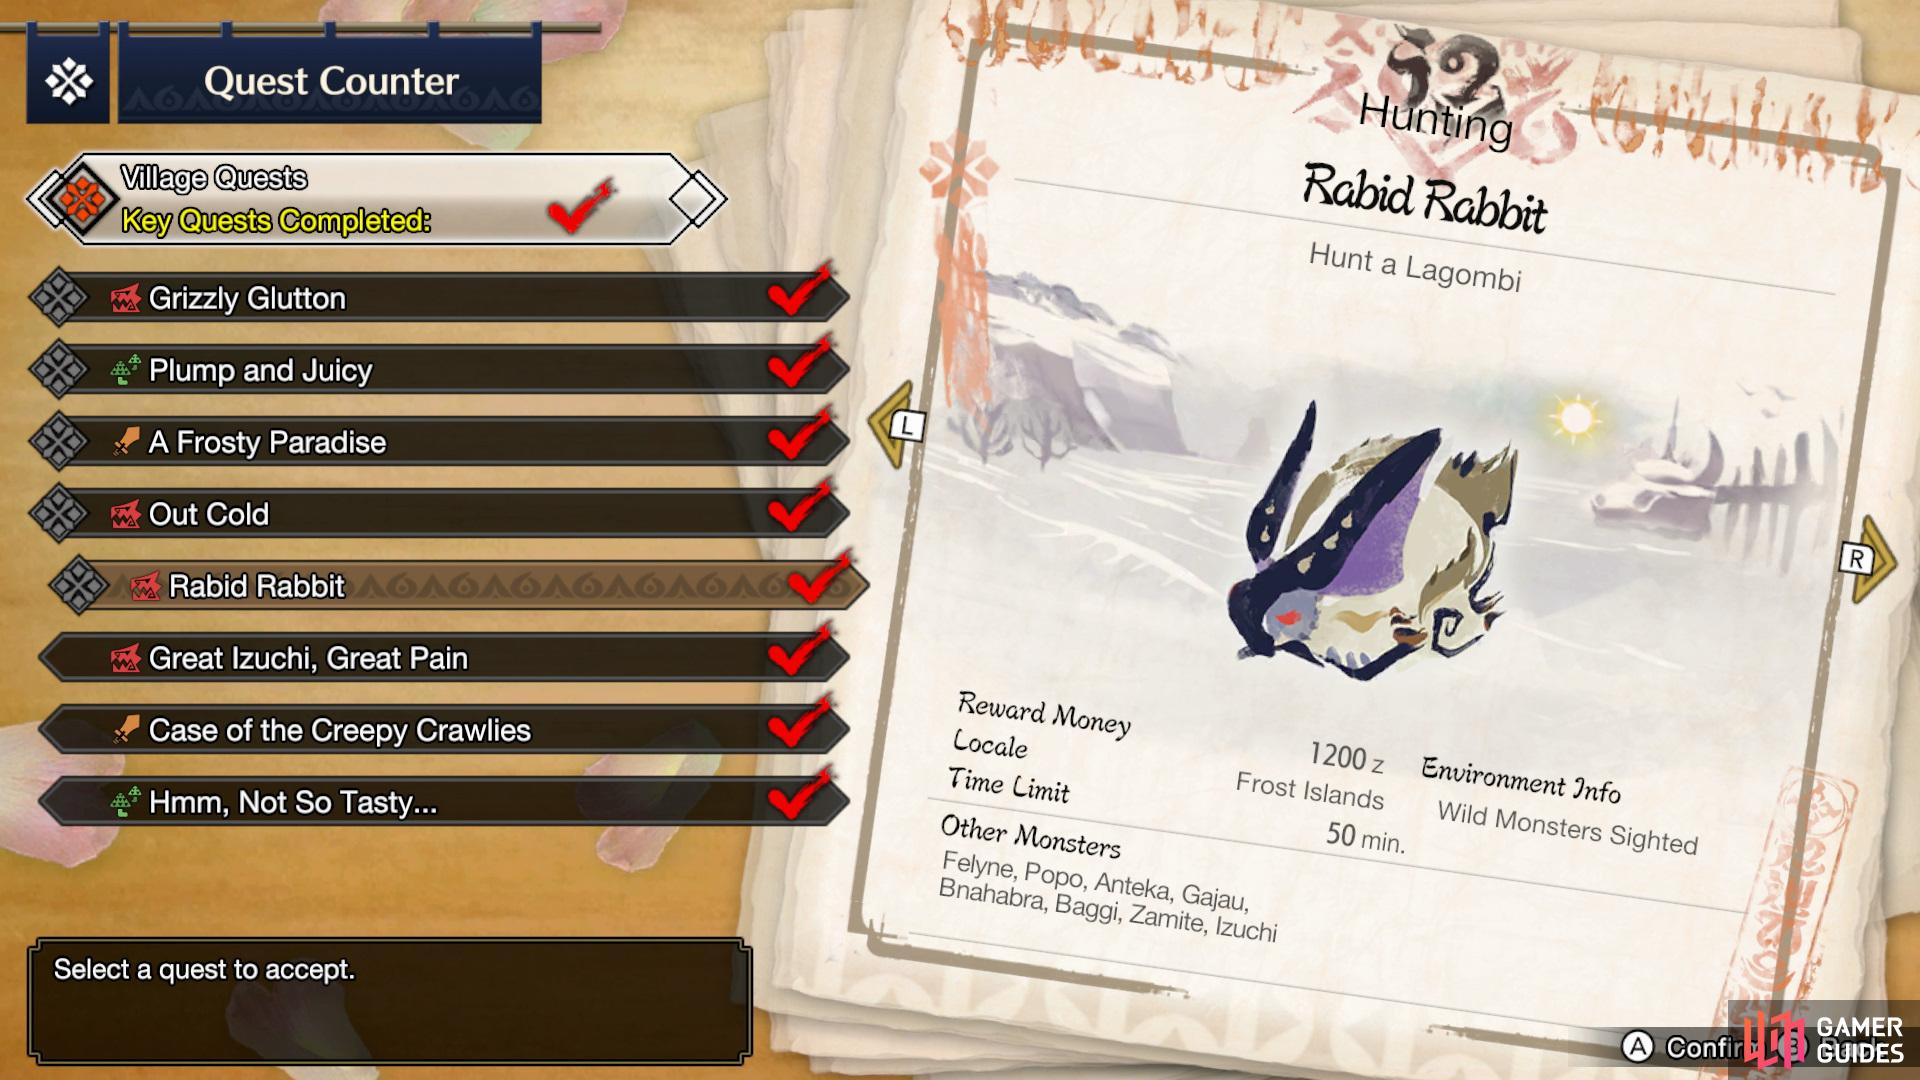 The Rabid Rabbit quest becomes available when you reach 2* Village Quests.